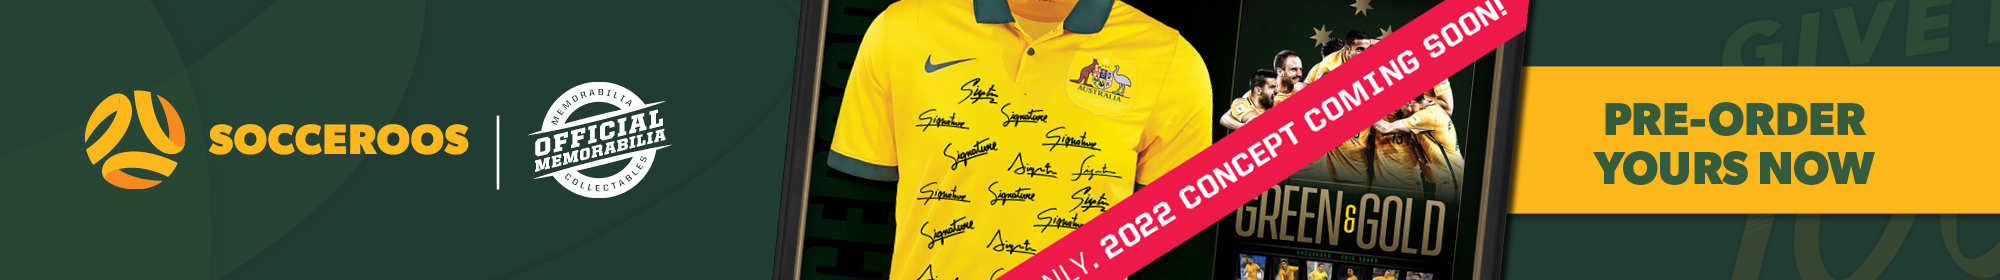 PRE-ORDER SOCCEROOS 2022 WORLD CUP SQUAD SIGNED JERSEY DISPLAY